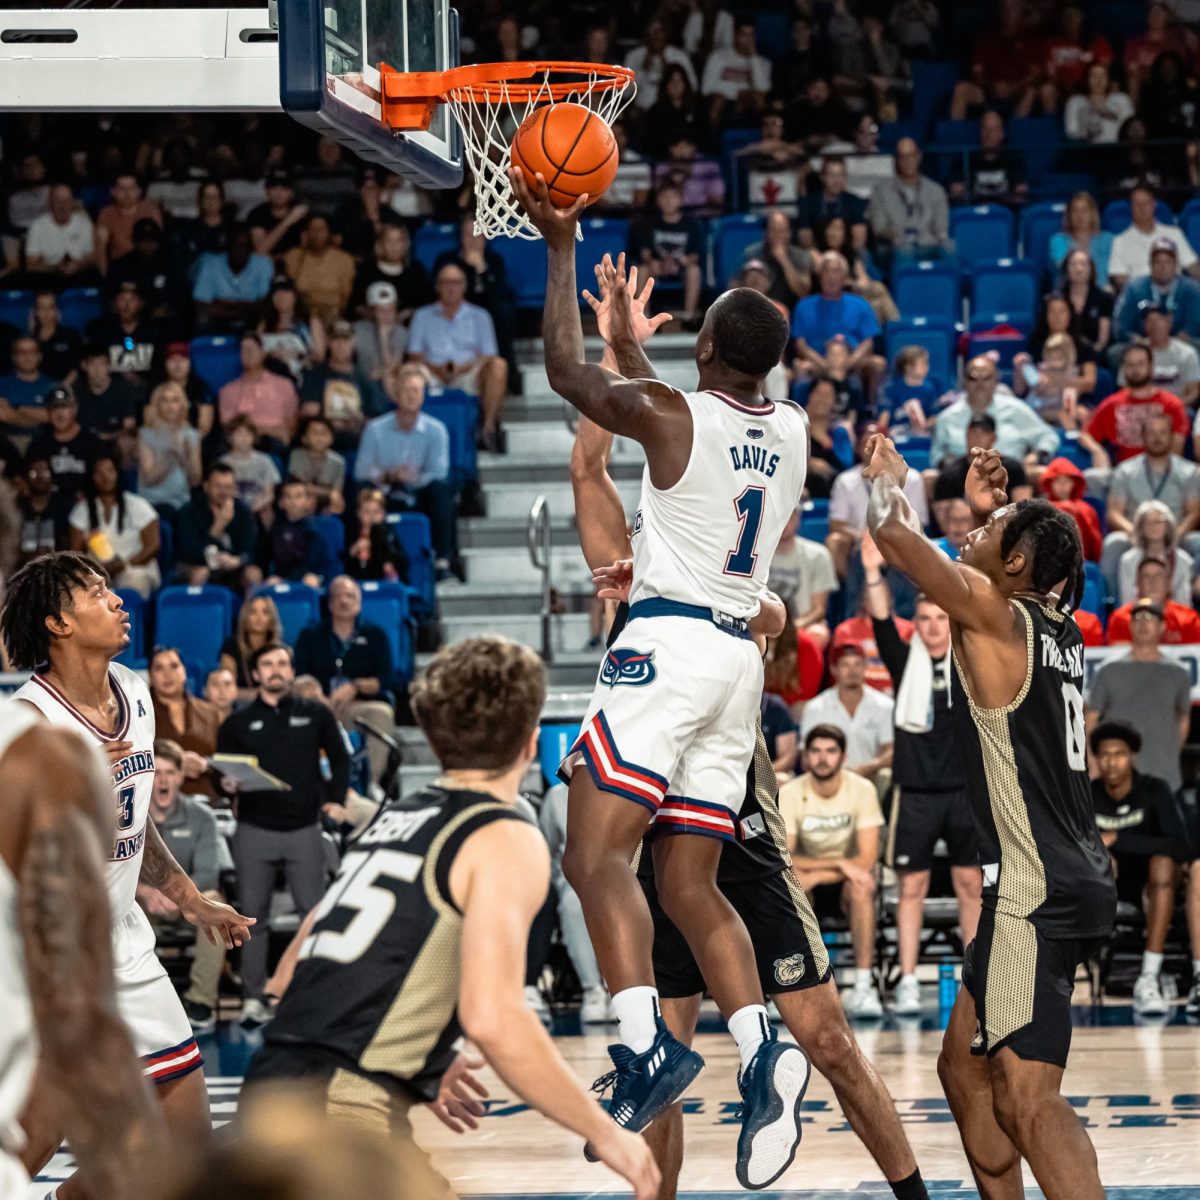 FAU+junior+guard+Johnell+Davis+%28%231%29+goes+for+a+lay-up+during+the+Owls+61-52+home+loss+to+the+Bryant+University+Bulldogs+on+Saturday%2C+Nov.+18%2C+2023+at+Eleanor+R.+Baldwin+Arena.